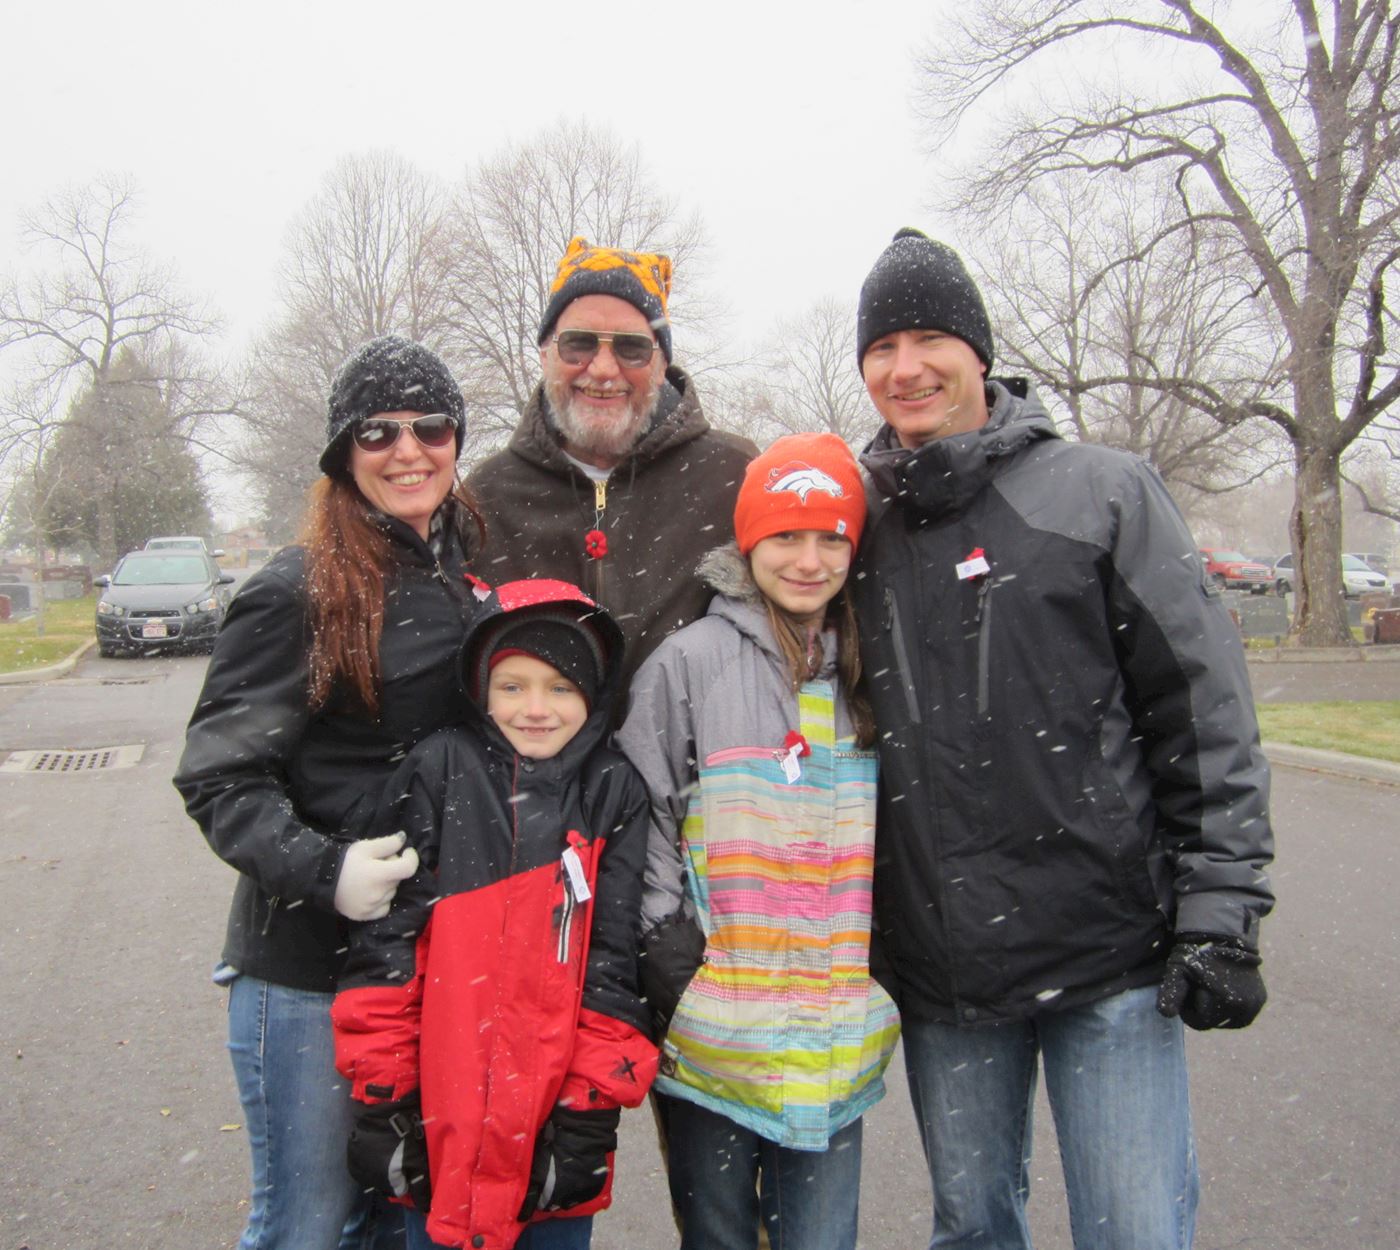 Lynn Clark served in the Navy and brought his family out to help with distributing our Wreaths in 2015